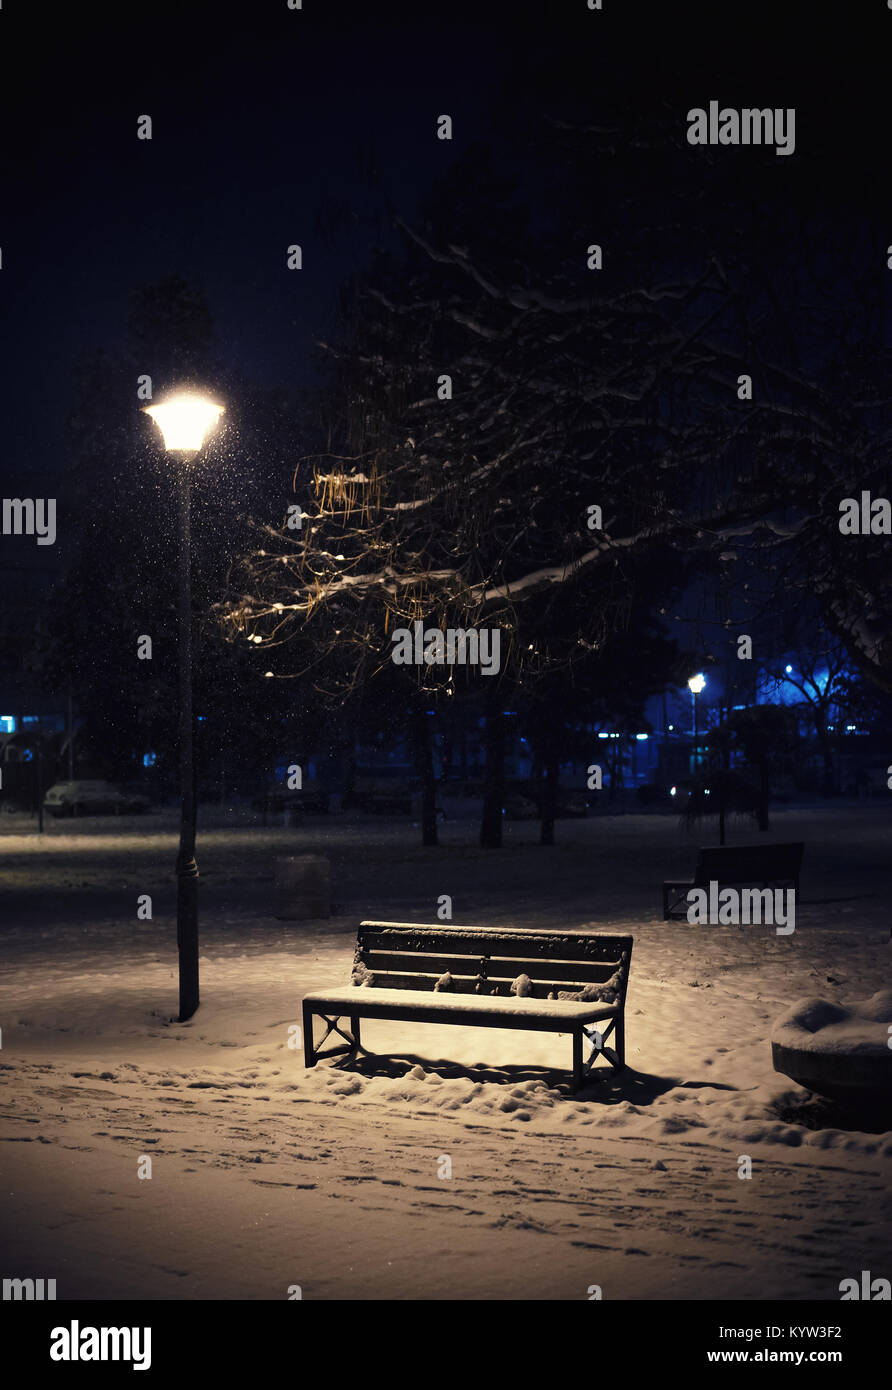 A night scene from a city park, a view of the bench, a lampion, and snow-covered branches. Stock Photo